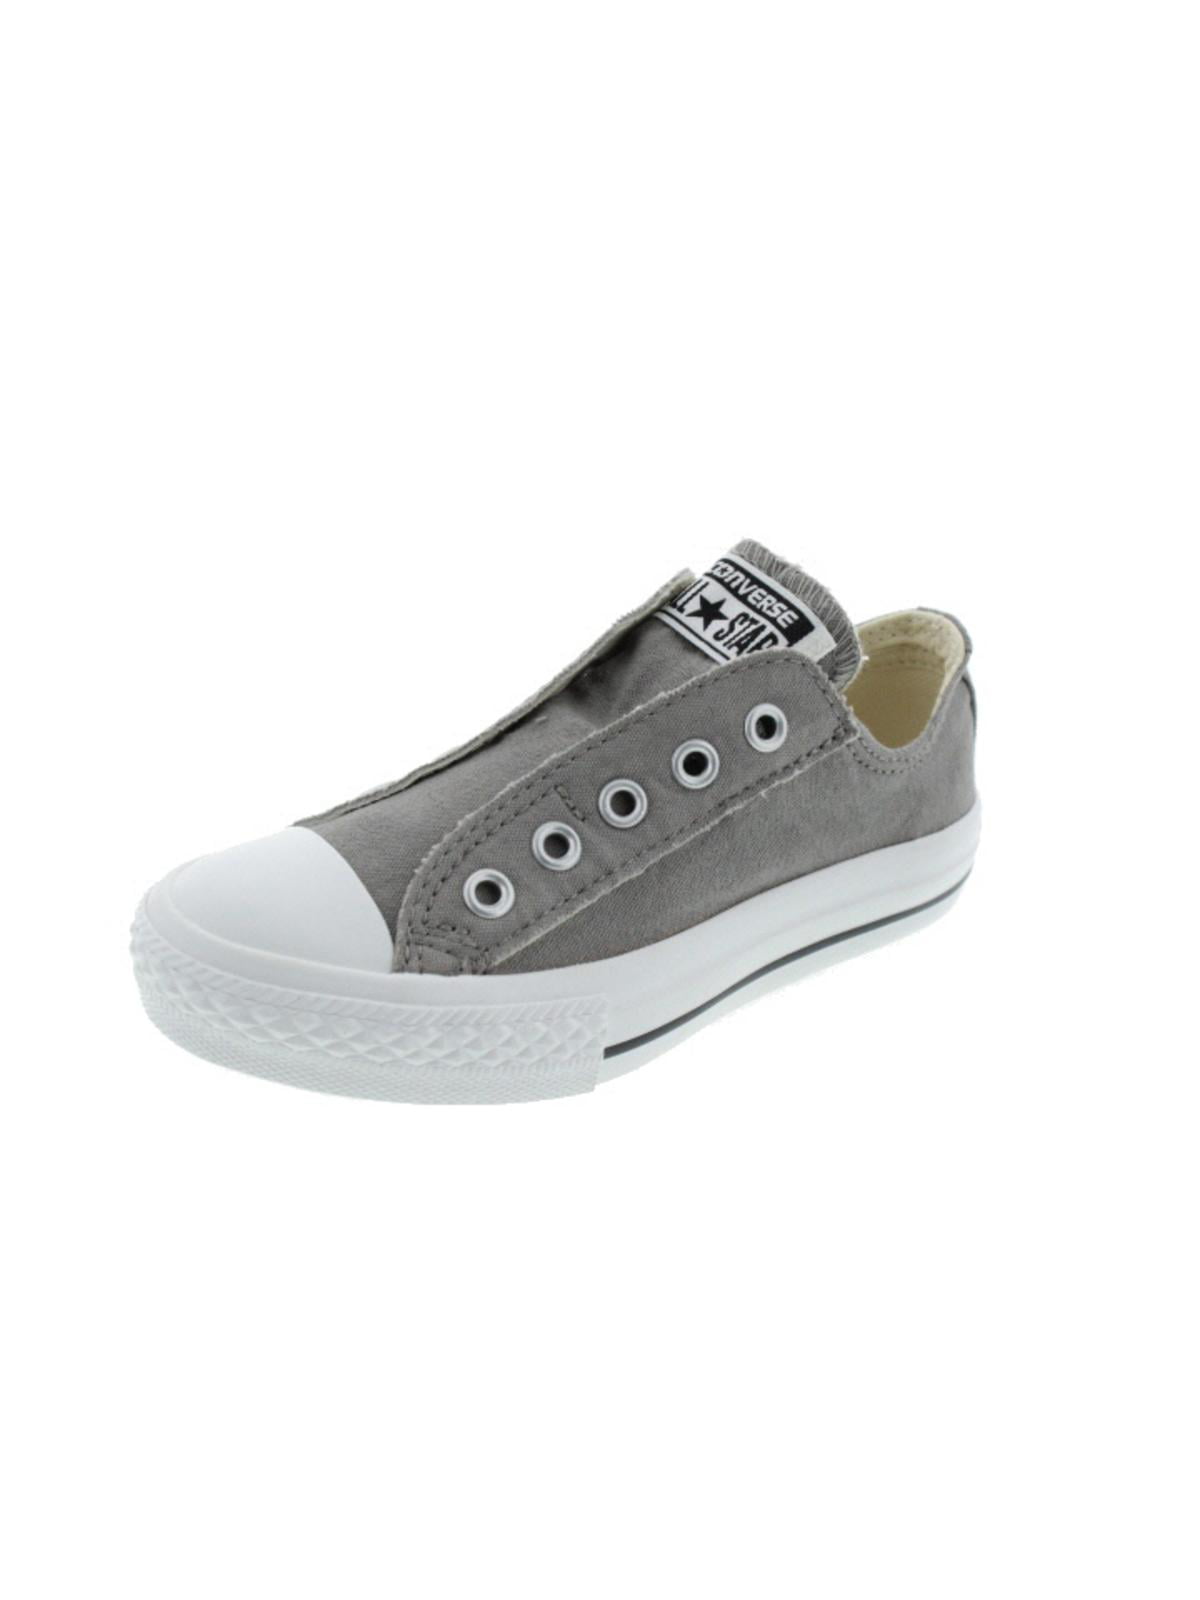 Converse Girls Canvas Laceless Casual Shoes 